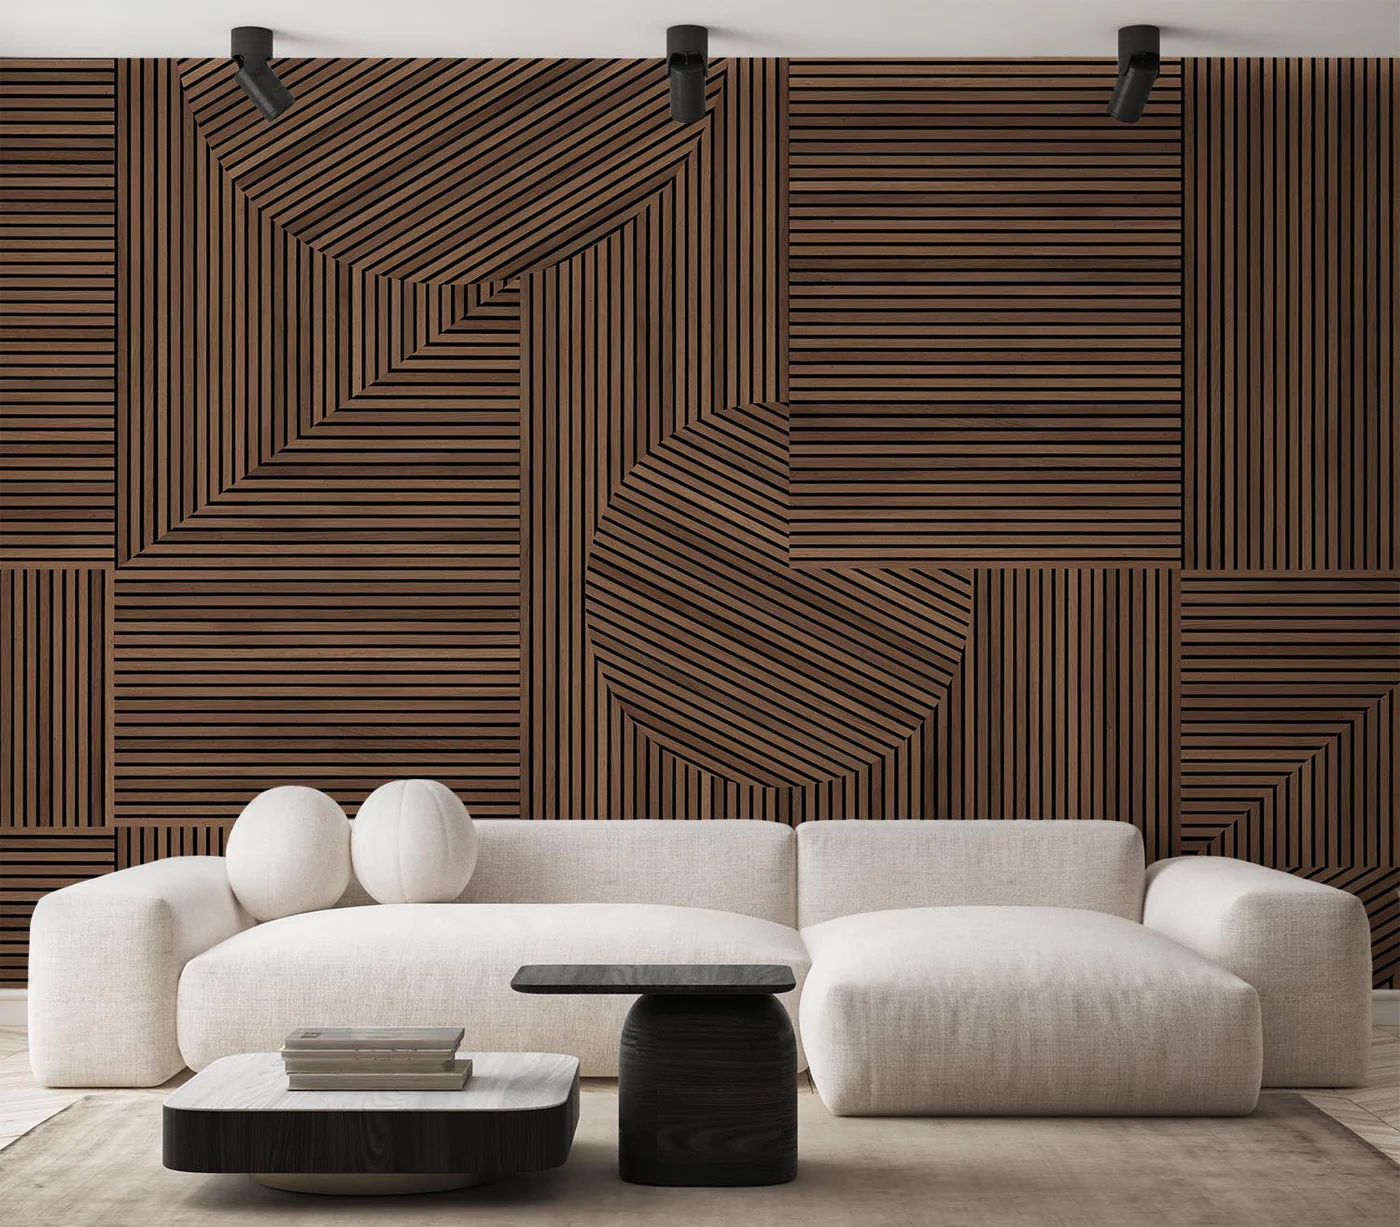 Wooden Panels: Aesthetic Appeal and Acoustic Enhancement for Your Home Decor